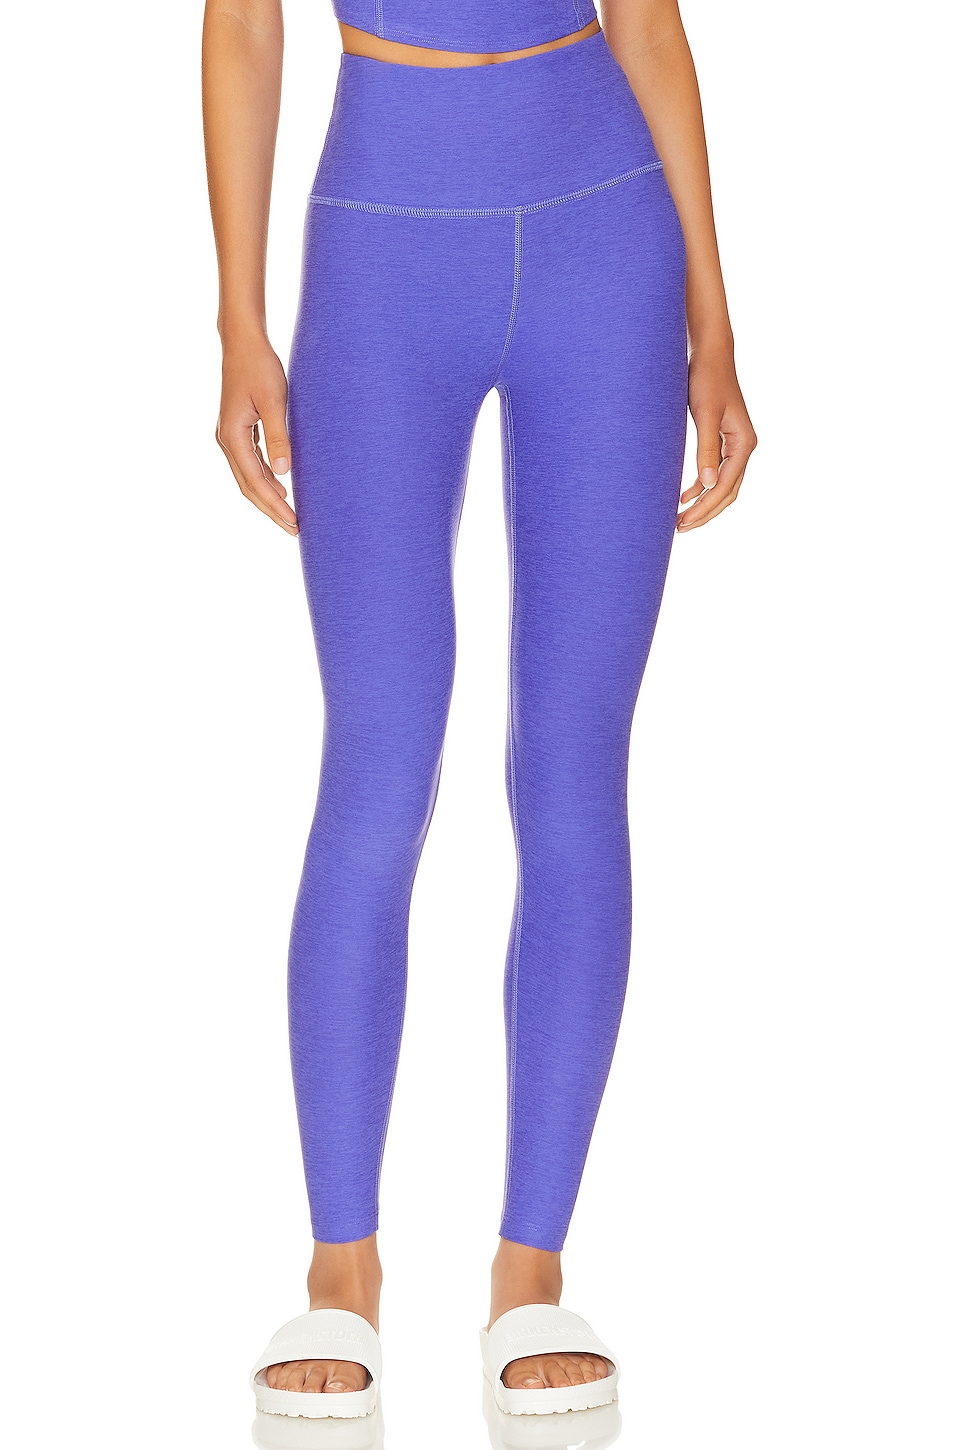 Beyond Yoga Caught In The Midi High Waisted Legging in Purple